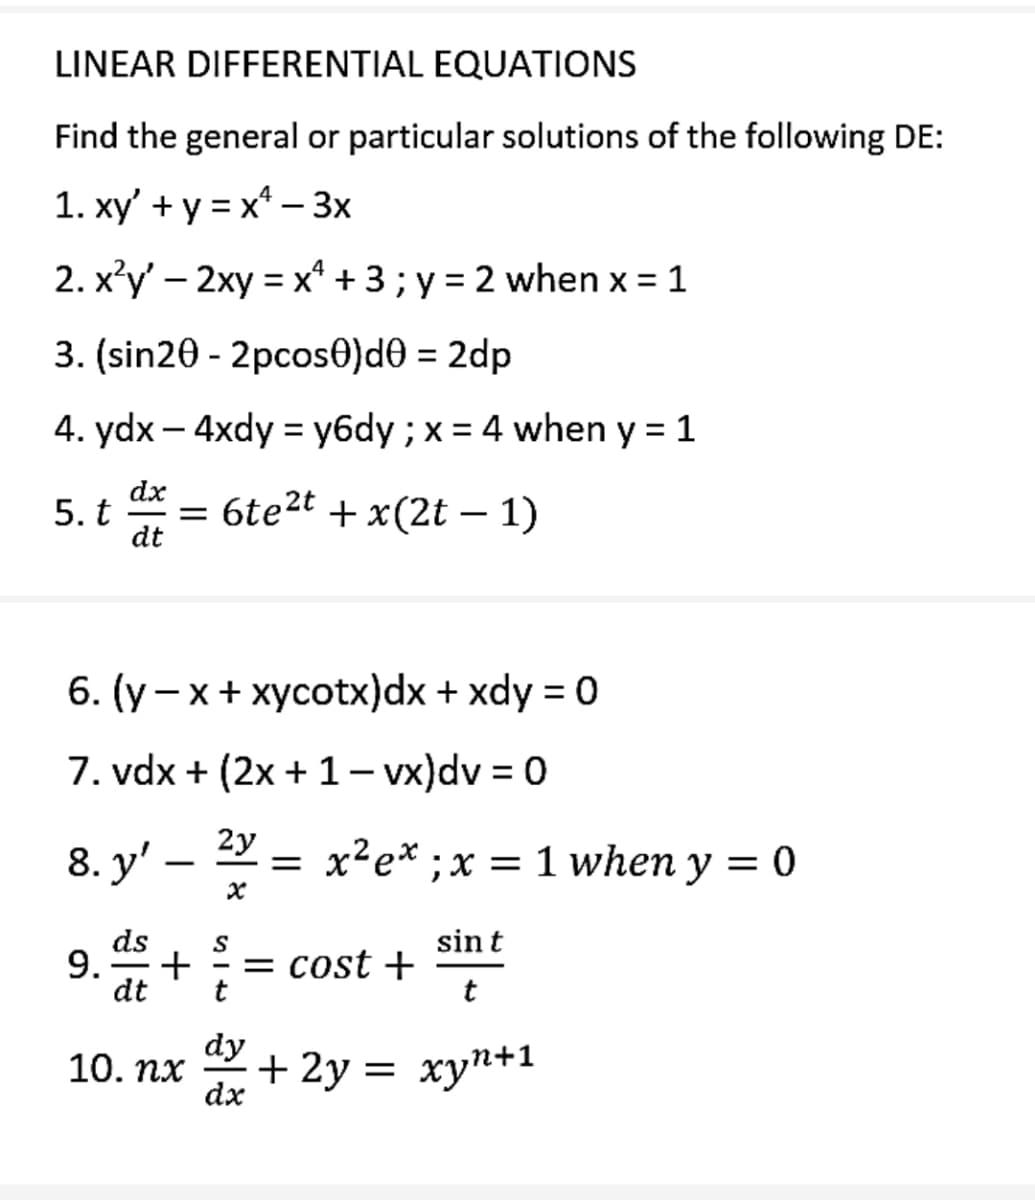 LINEAR DIFFERENTIAL EQUATIONS
Find the general or particular solutions of the following DE:
1. xy' + y = x - 3x
2. x²y' - 2xy = x + 3; y = 2 when x = 1
3. (sin20 - 2pcos0)d0 = 2dp
4. ydx - 4xdy = y6dy ; x = 4 when y = 1
dx
dt
5. t
= 6te²t + x(2t - 1)
6. (y-x + xycotx)dx + xdy = 0
7. vdx + (2x + 1 - vx)dv = 0
2y
8. y' — ² = x²ex ; x = 1 when y = 0
-
x
ds
S
9. + = = cost +
dt
t
10. nx
dy
dx
sin t
t
+ 2y = xyn+1